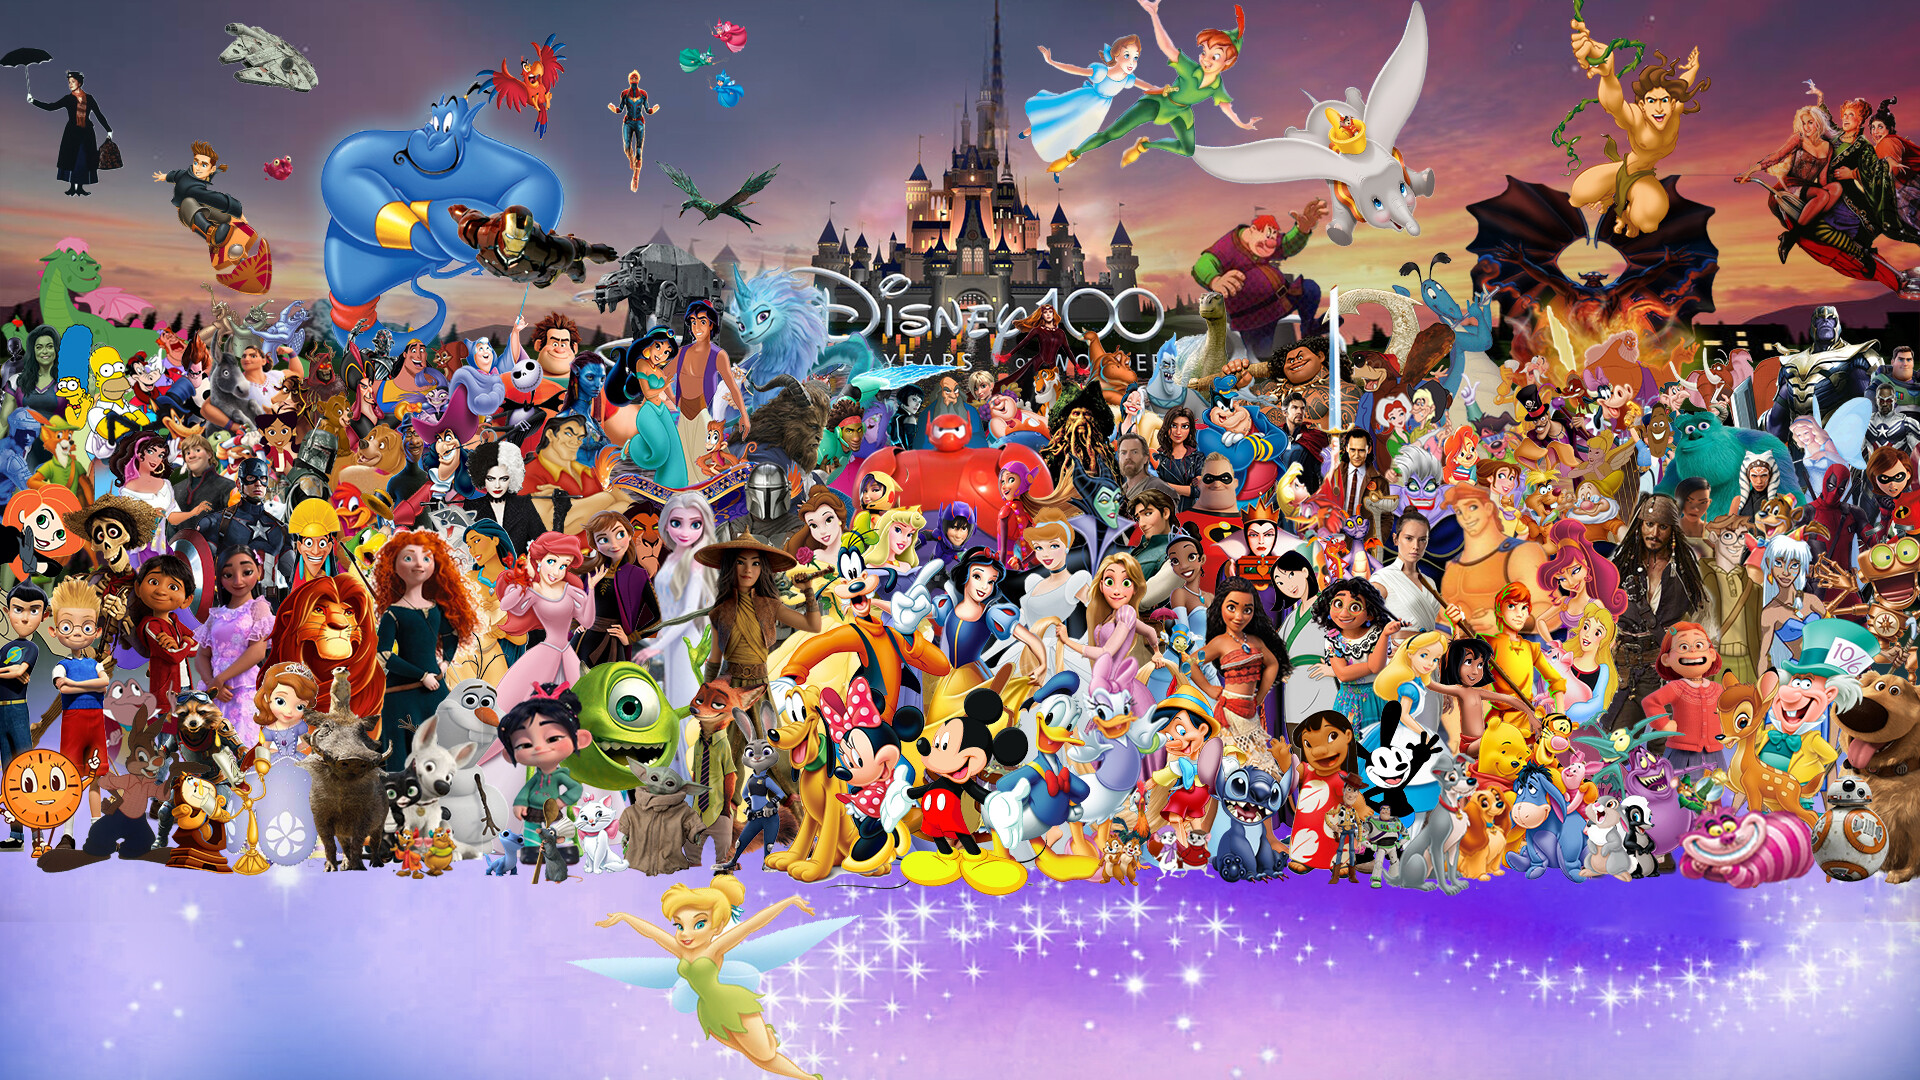 Download Video and Mobile Backgrounds  Disney100  Disney Indonesia